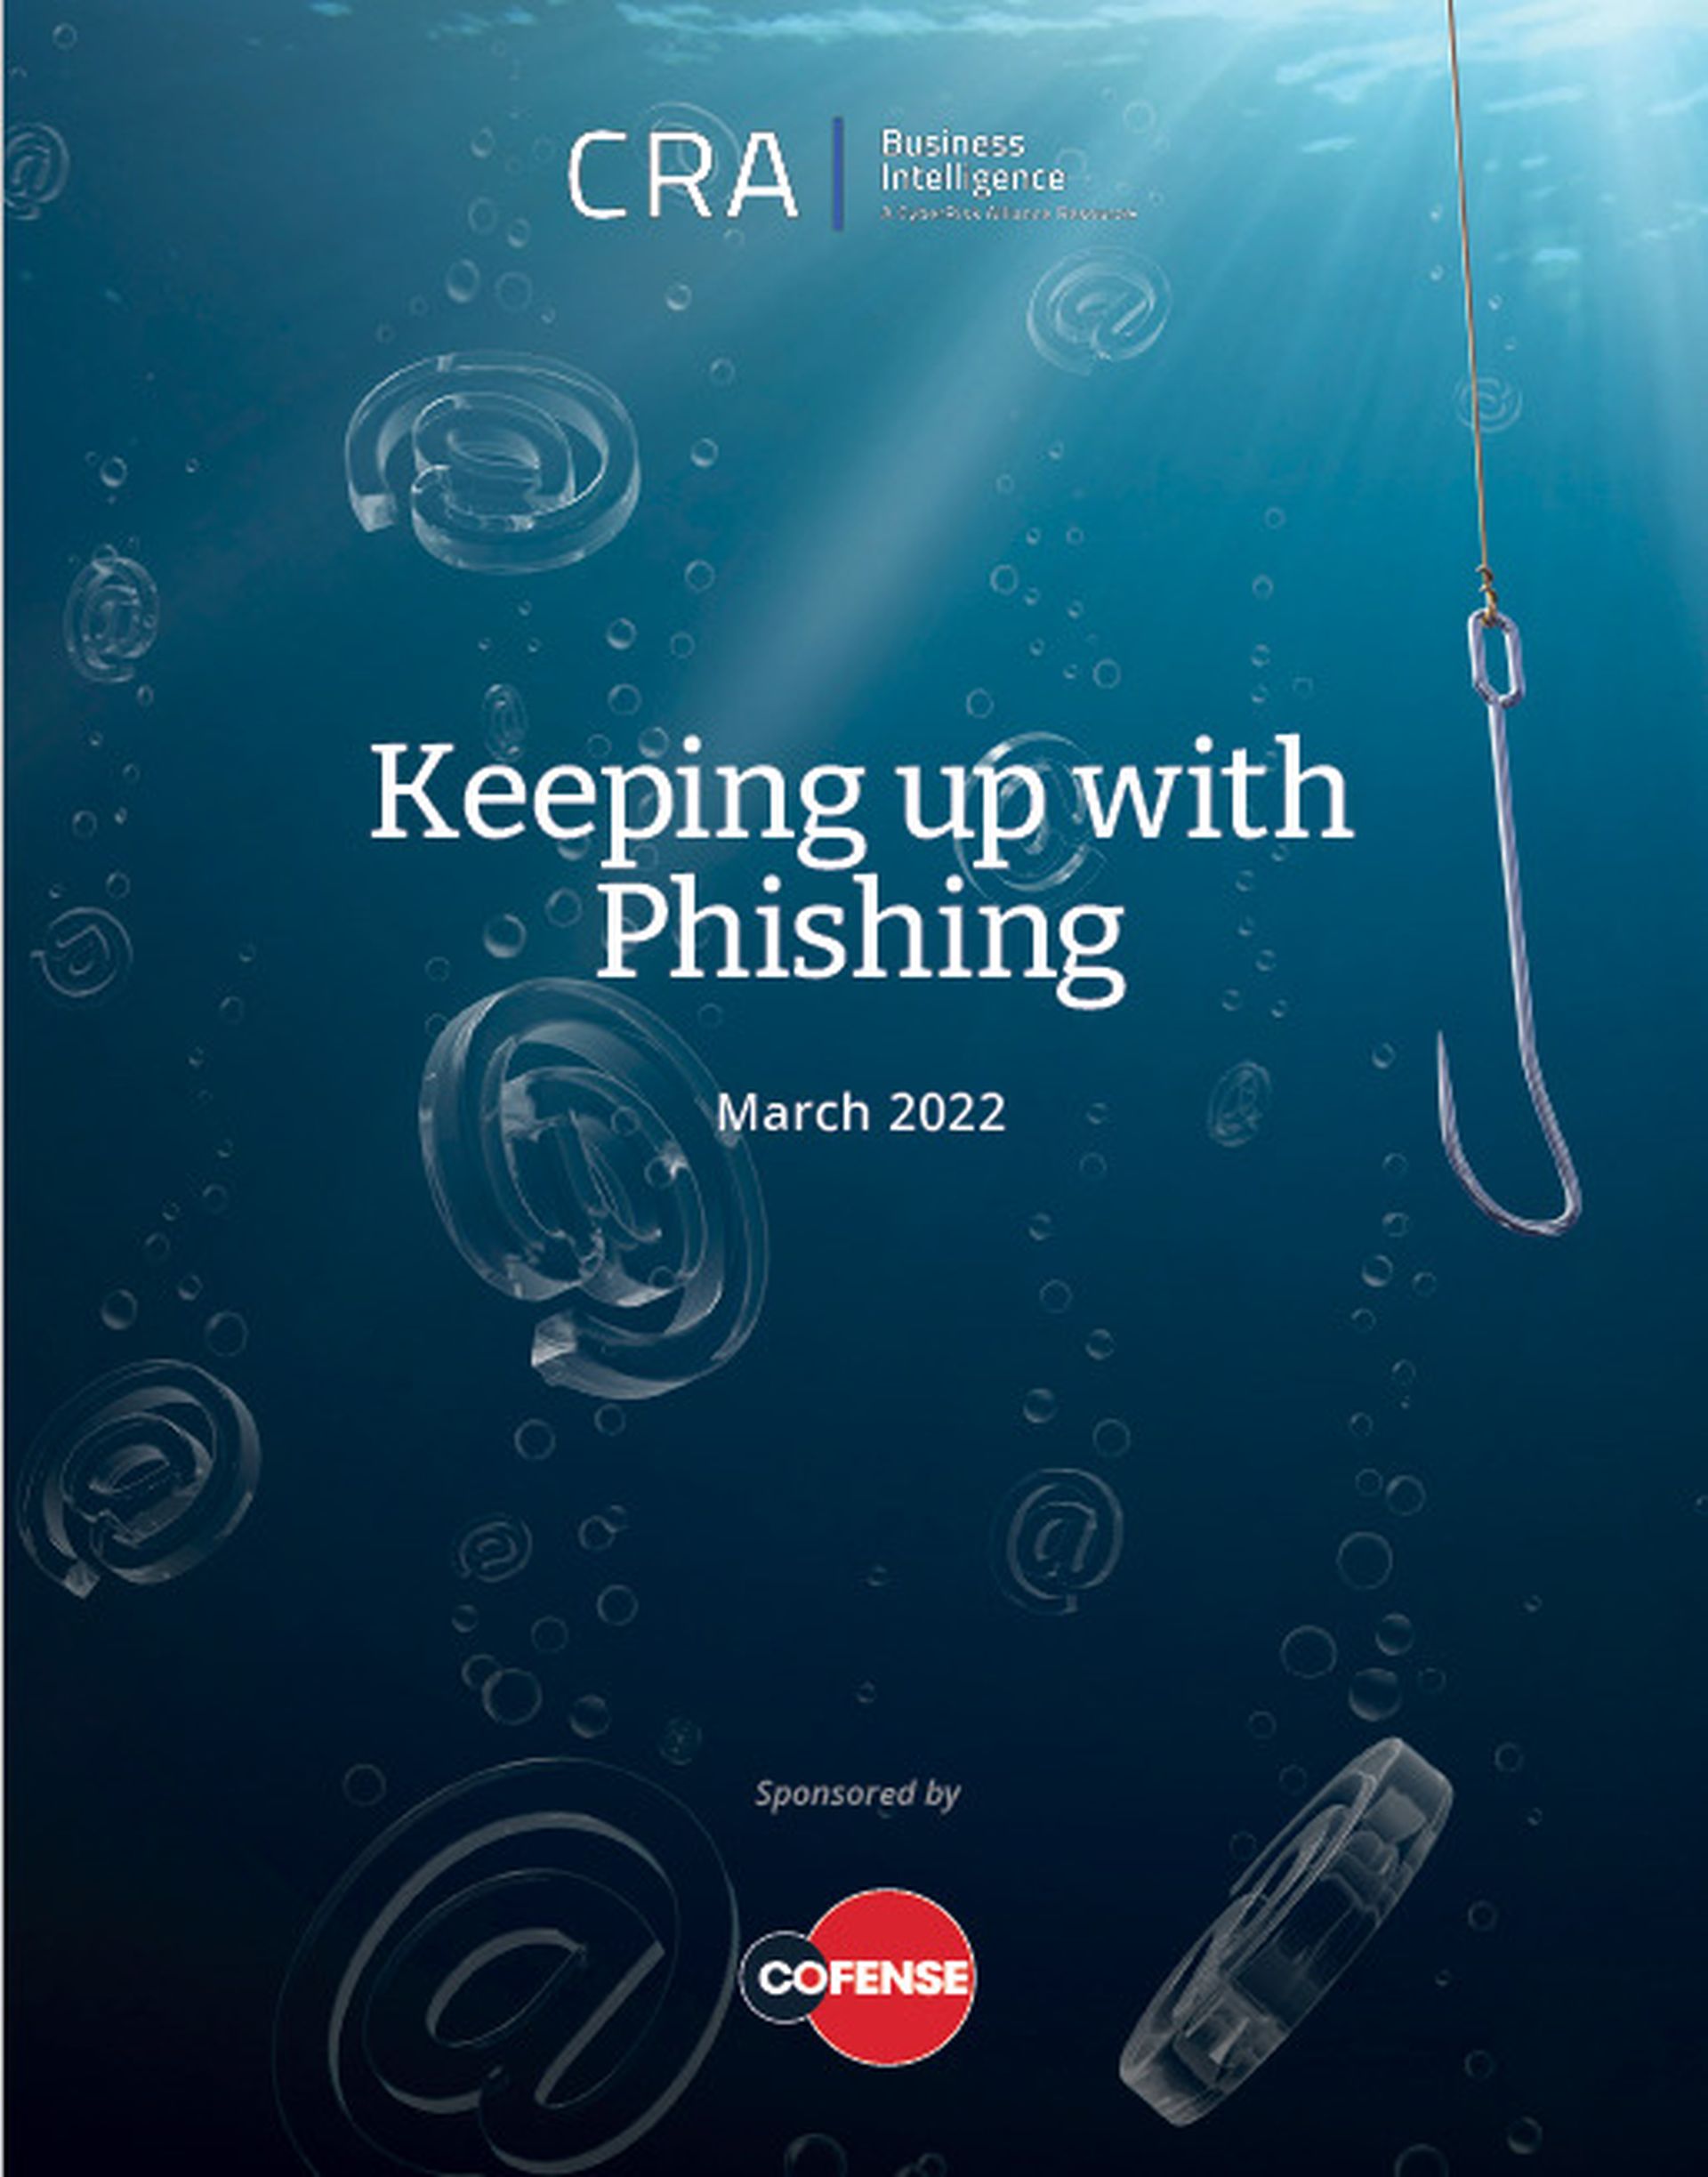 CRA Study: Global Phishing Incidents Increasingly Driven by Ransomware Gangs